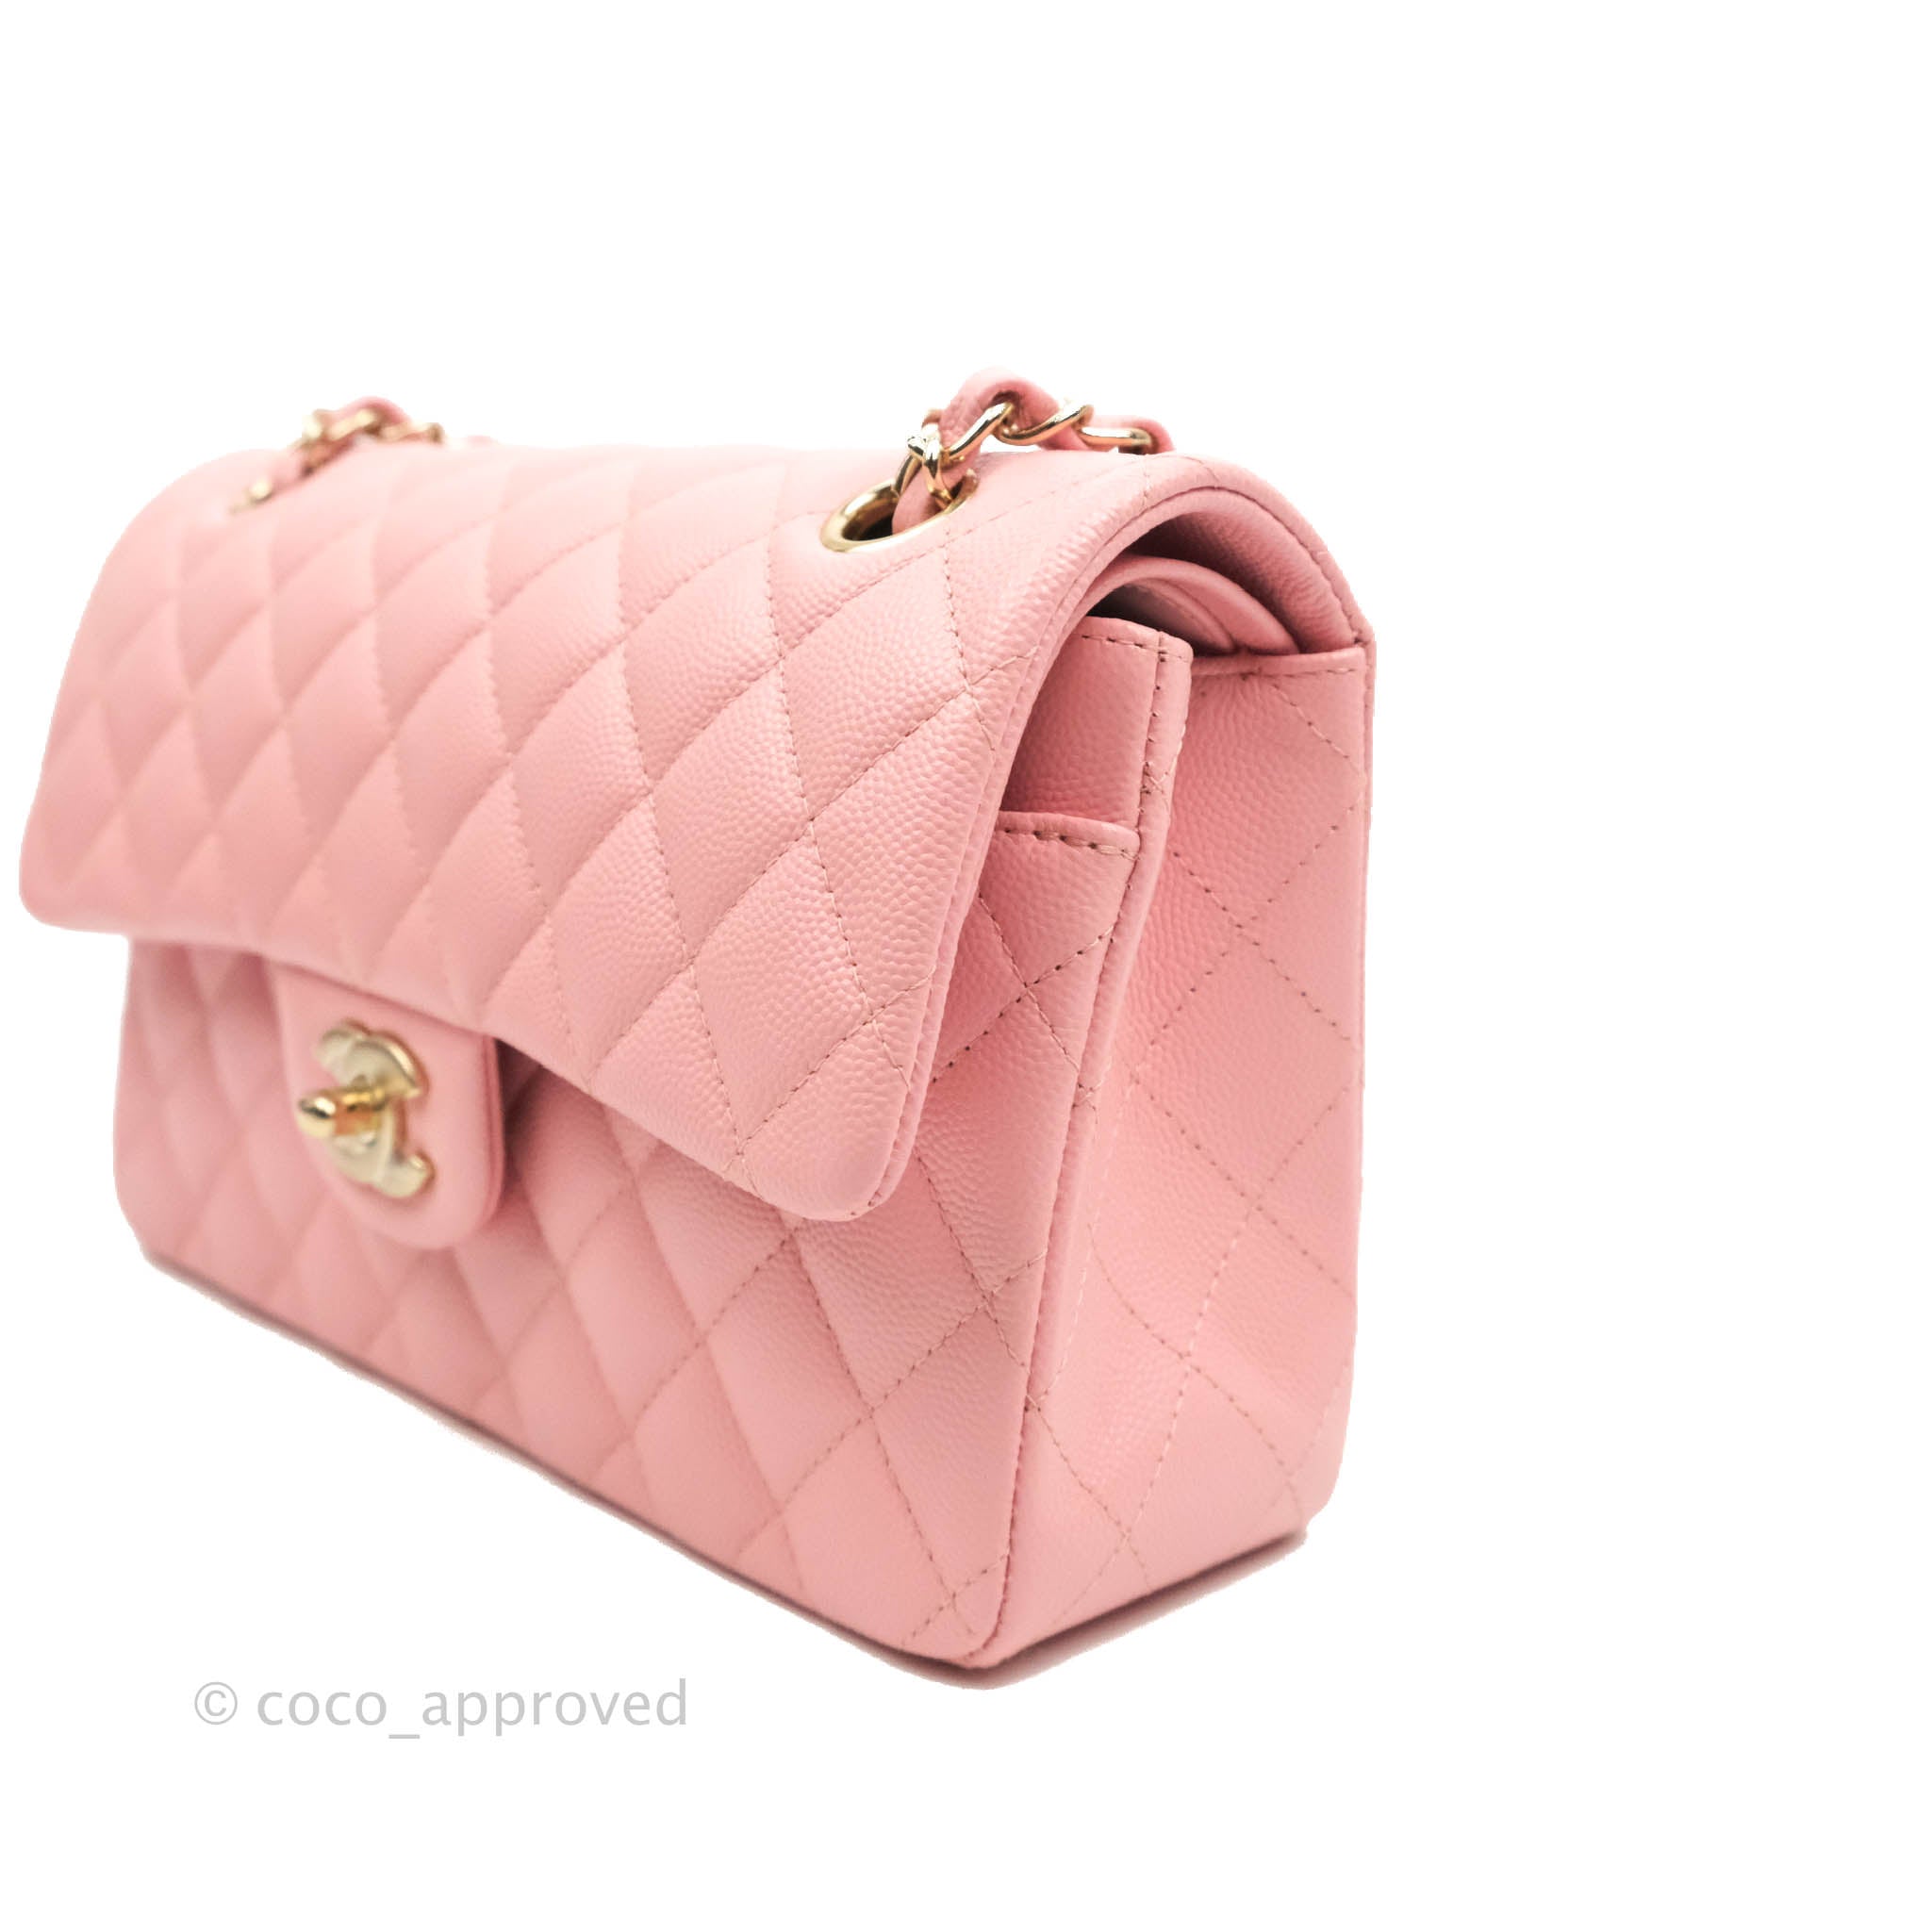 Pink Quilted Caviar Small Classic Double Flap Gold Hardware, 2022